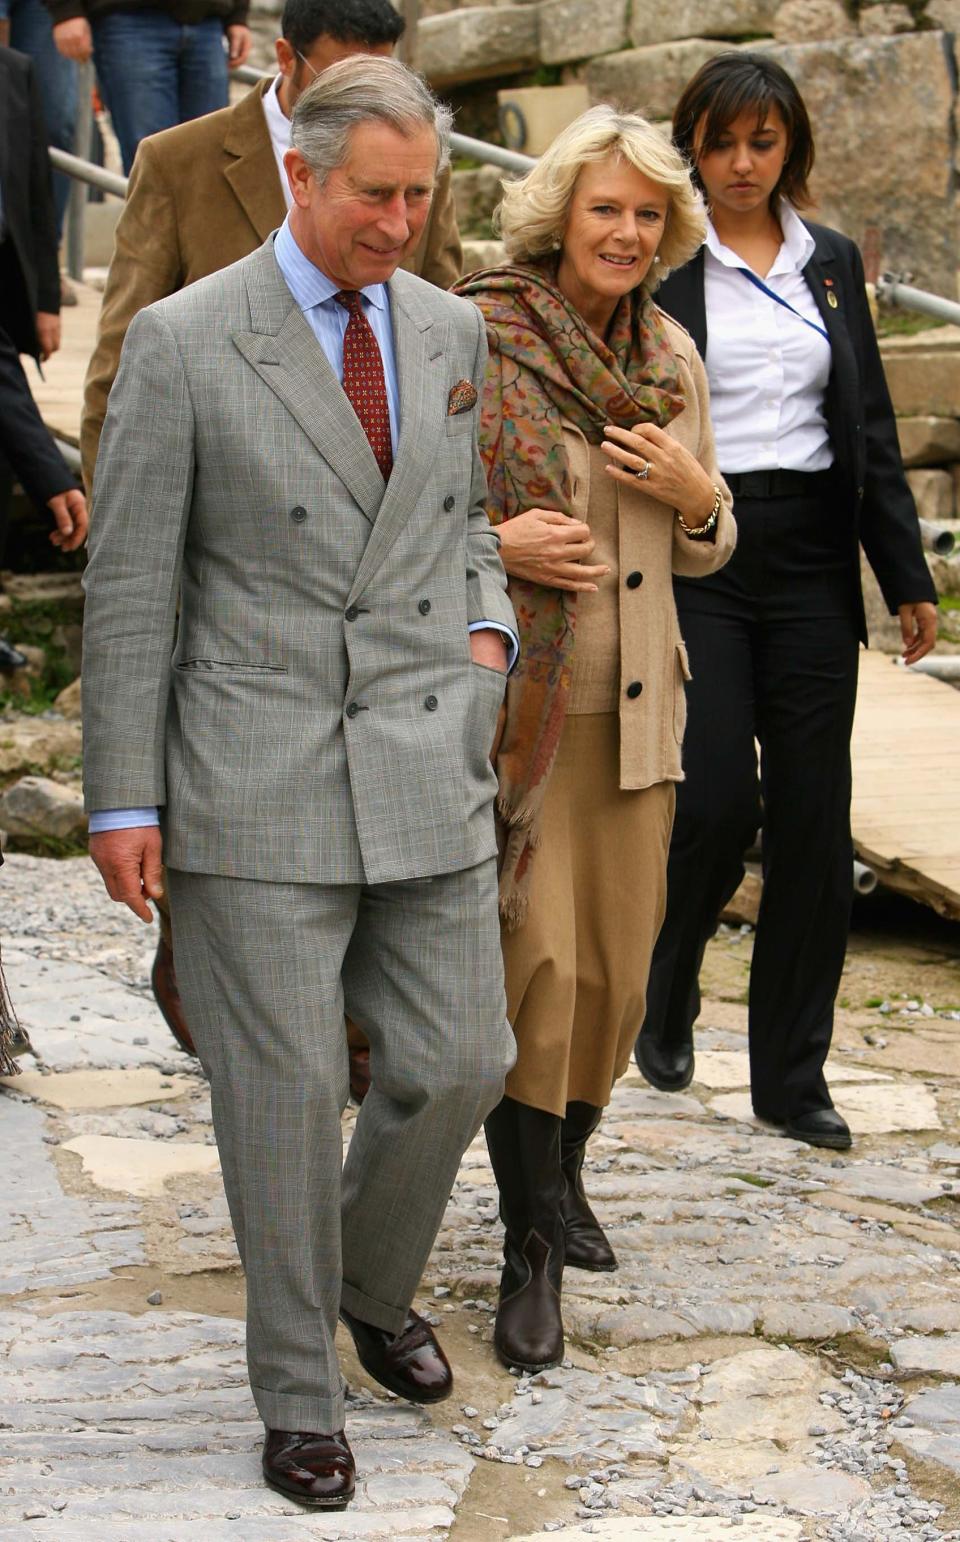 EPHESUS, TURKEY - NOVEMBER 27:  Camilla, Duchess of Cornwall and Prince Charles, Prince of Wales tour the library of Celsus built in AD 125 during a tour of the historical site of Ephesus on day two of a four day tour of Turkey on November 27, 2007 in Ephesus, Turkey. The Royal couple&#39;s tour will take in many historic and cultural sites.  (Photo by Chris Jackson/Getty Images)